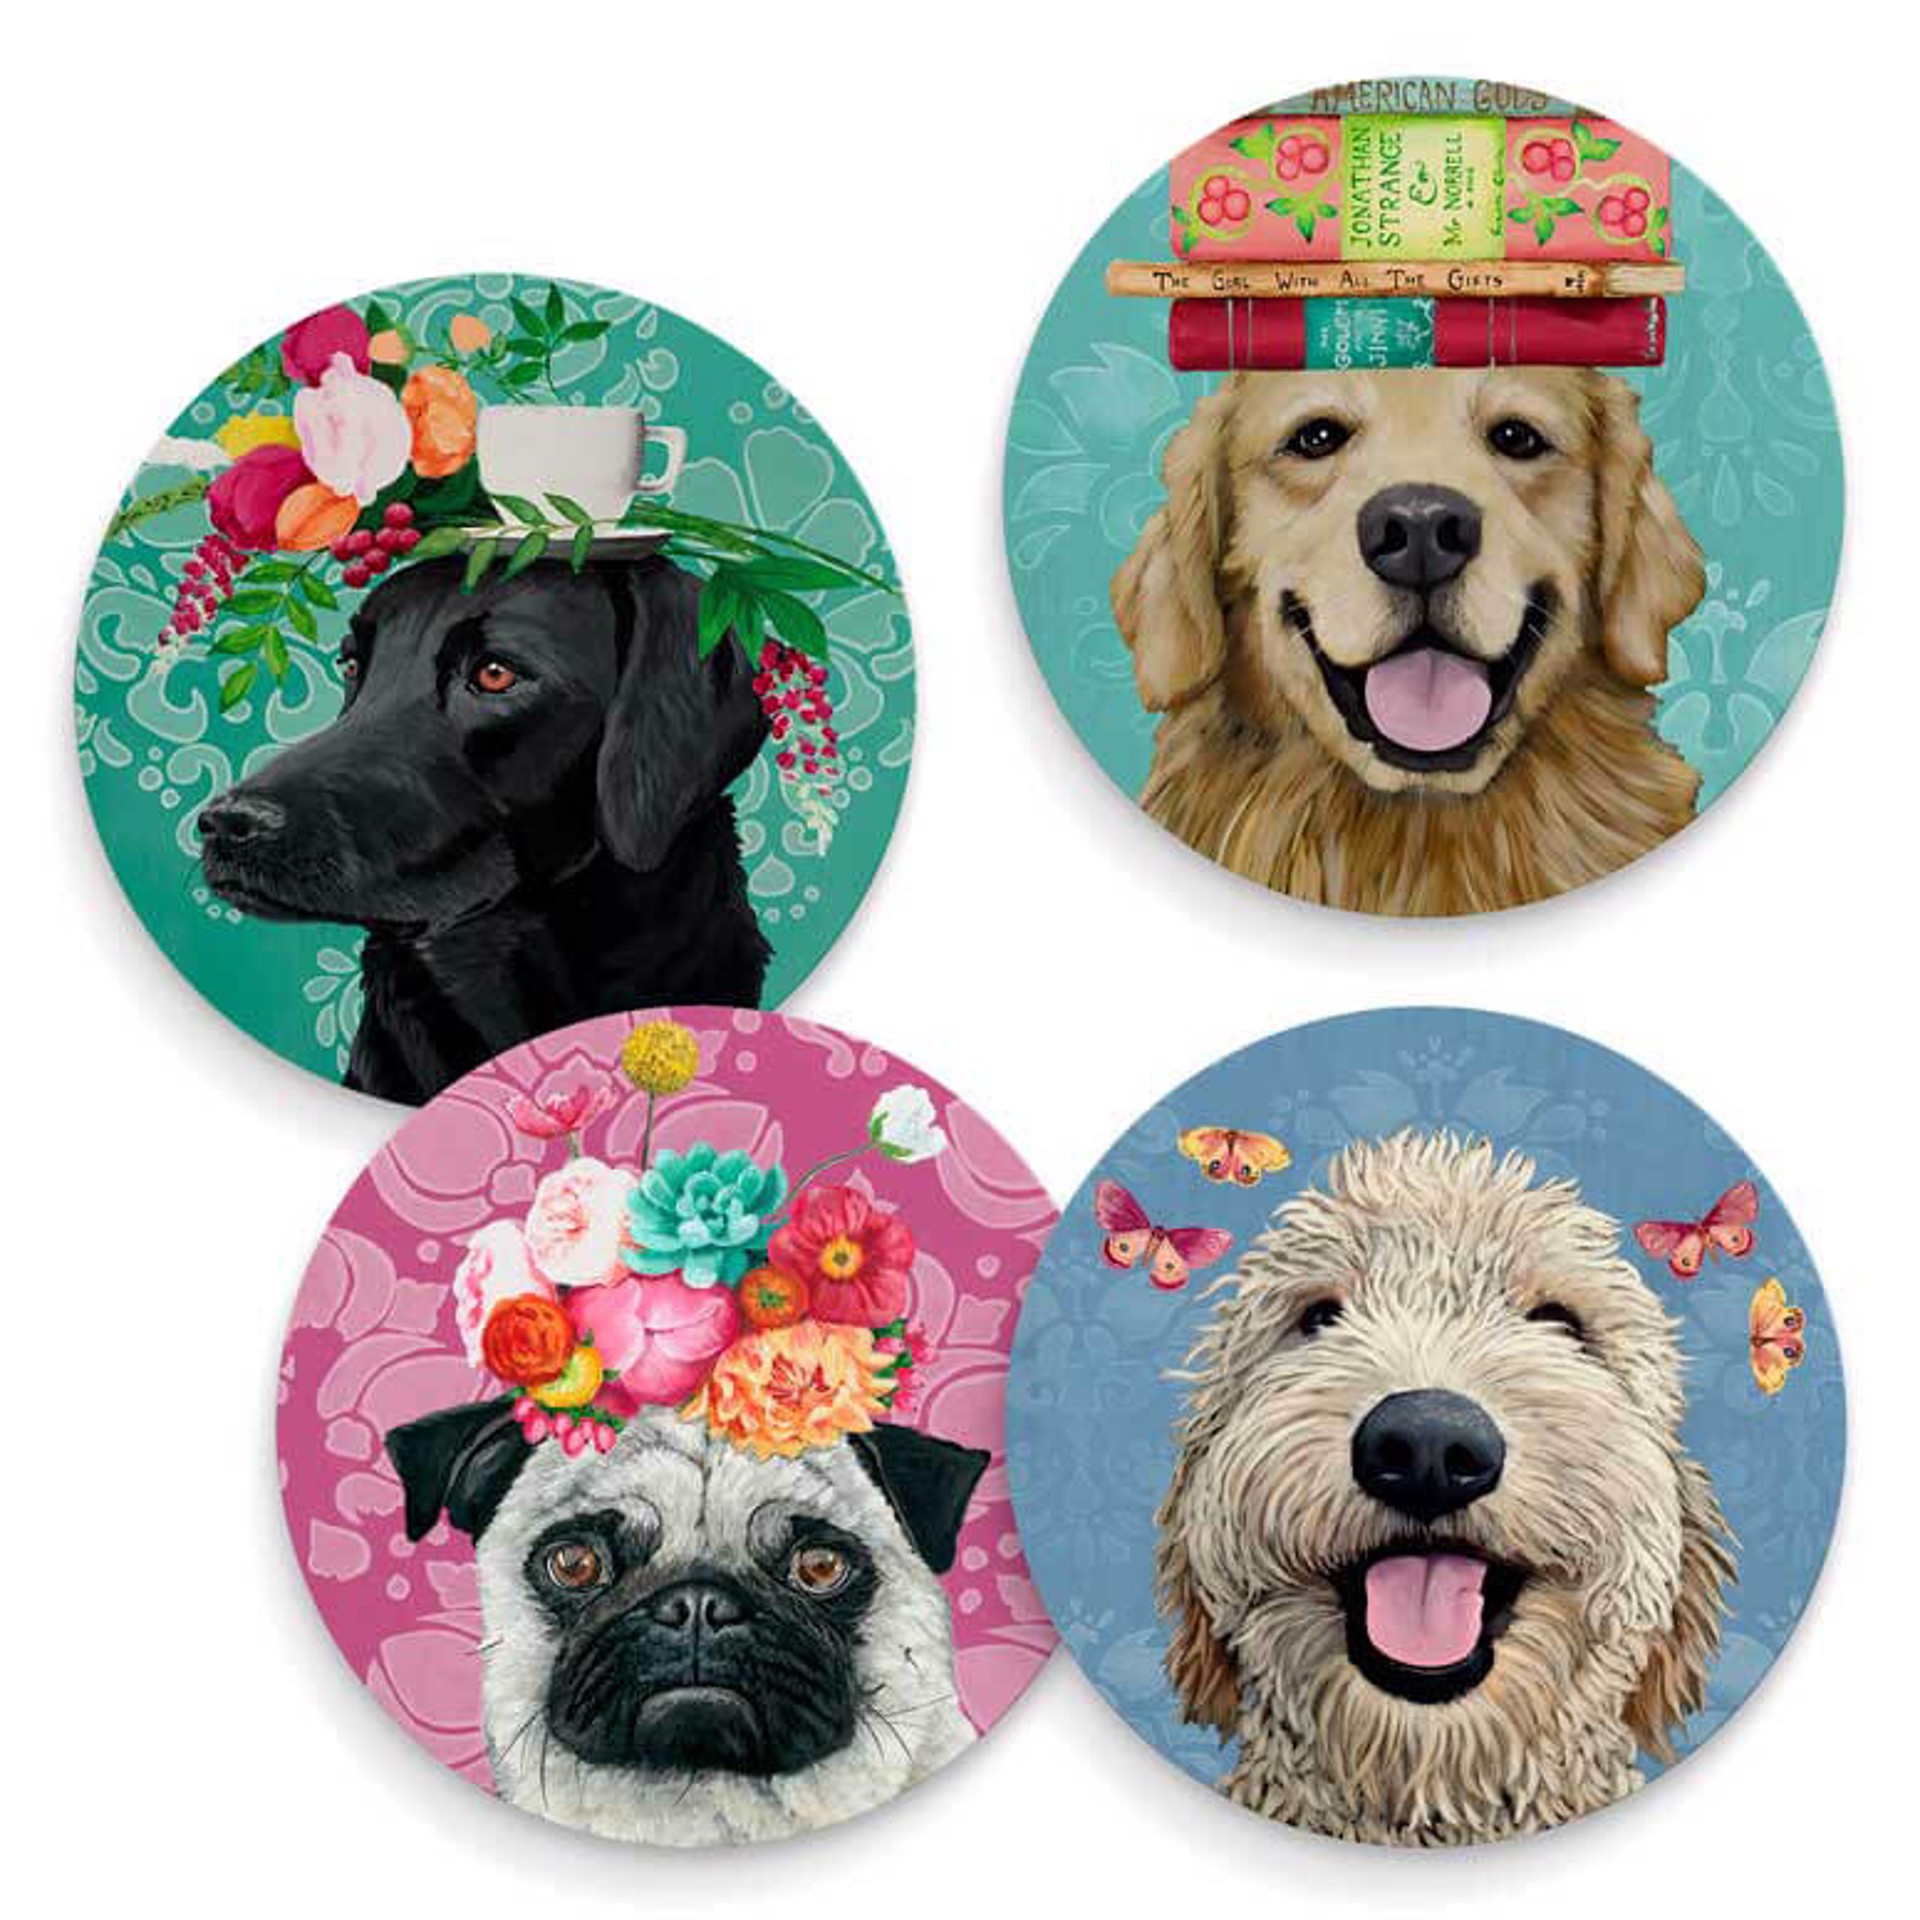 Happy Dogs Coaster Set of 4 by Heather Gauthier